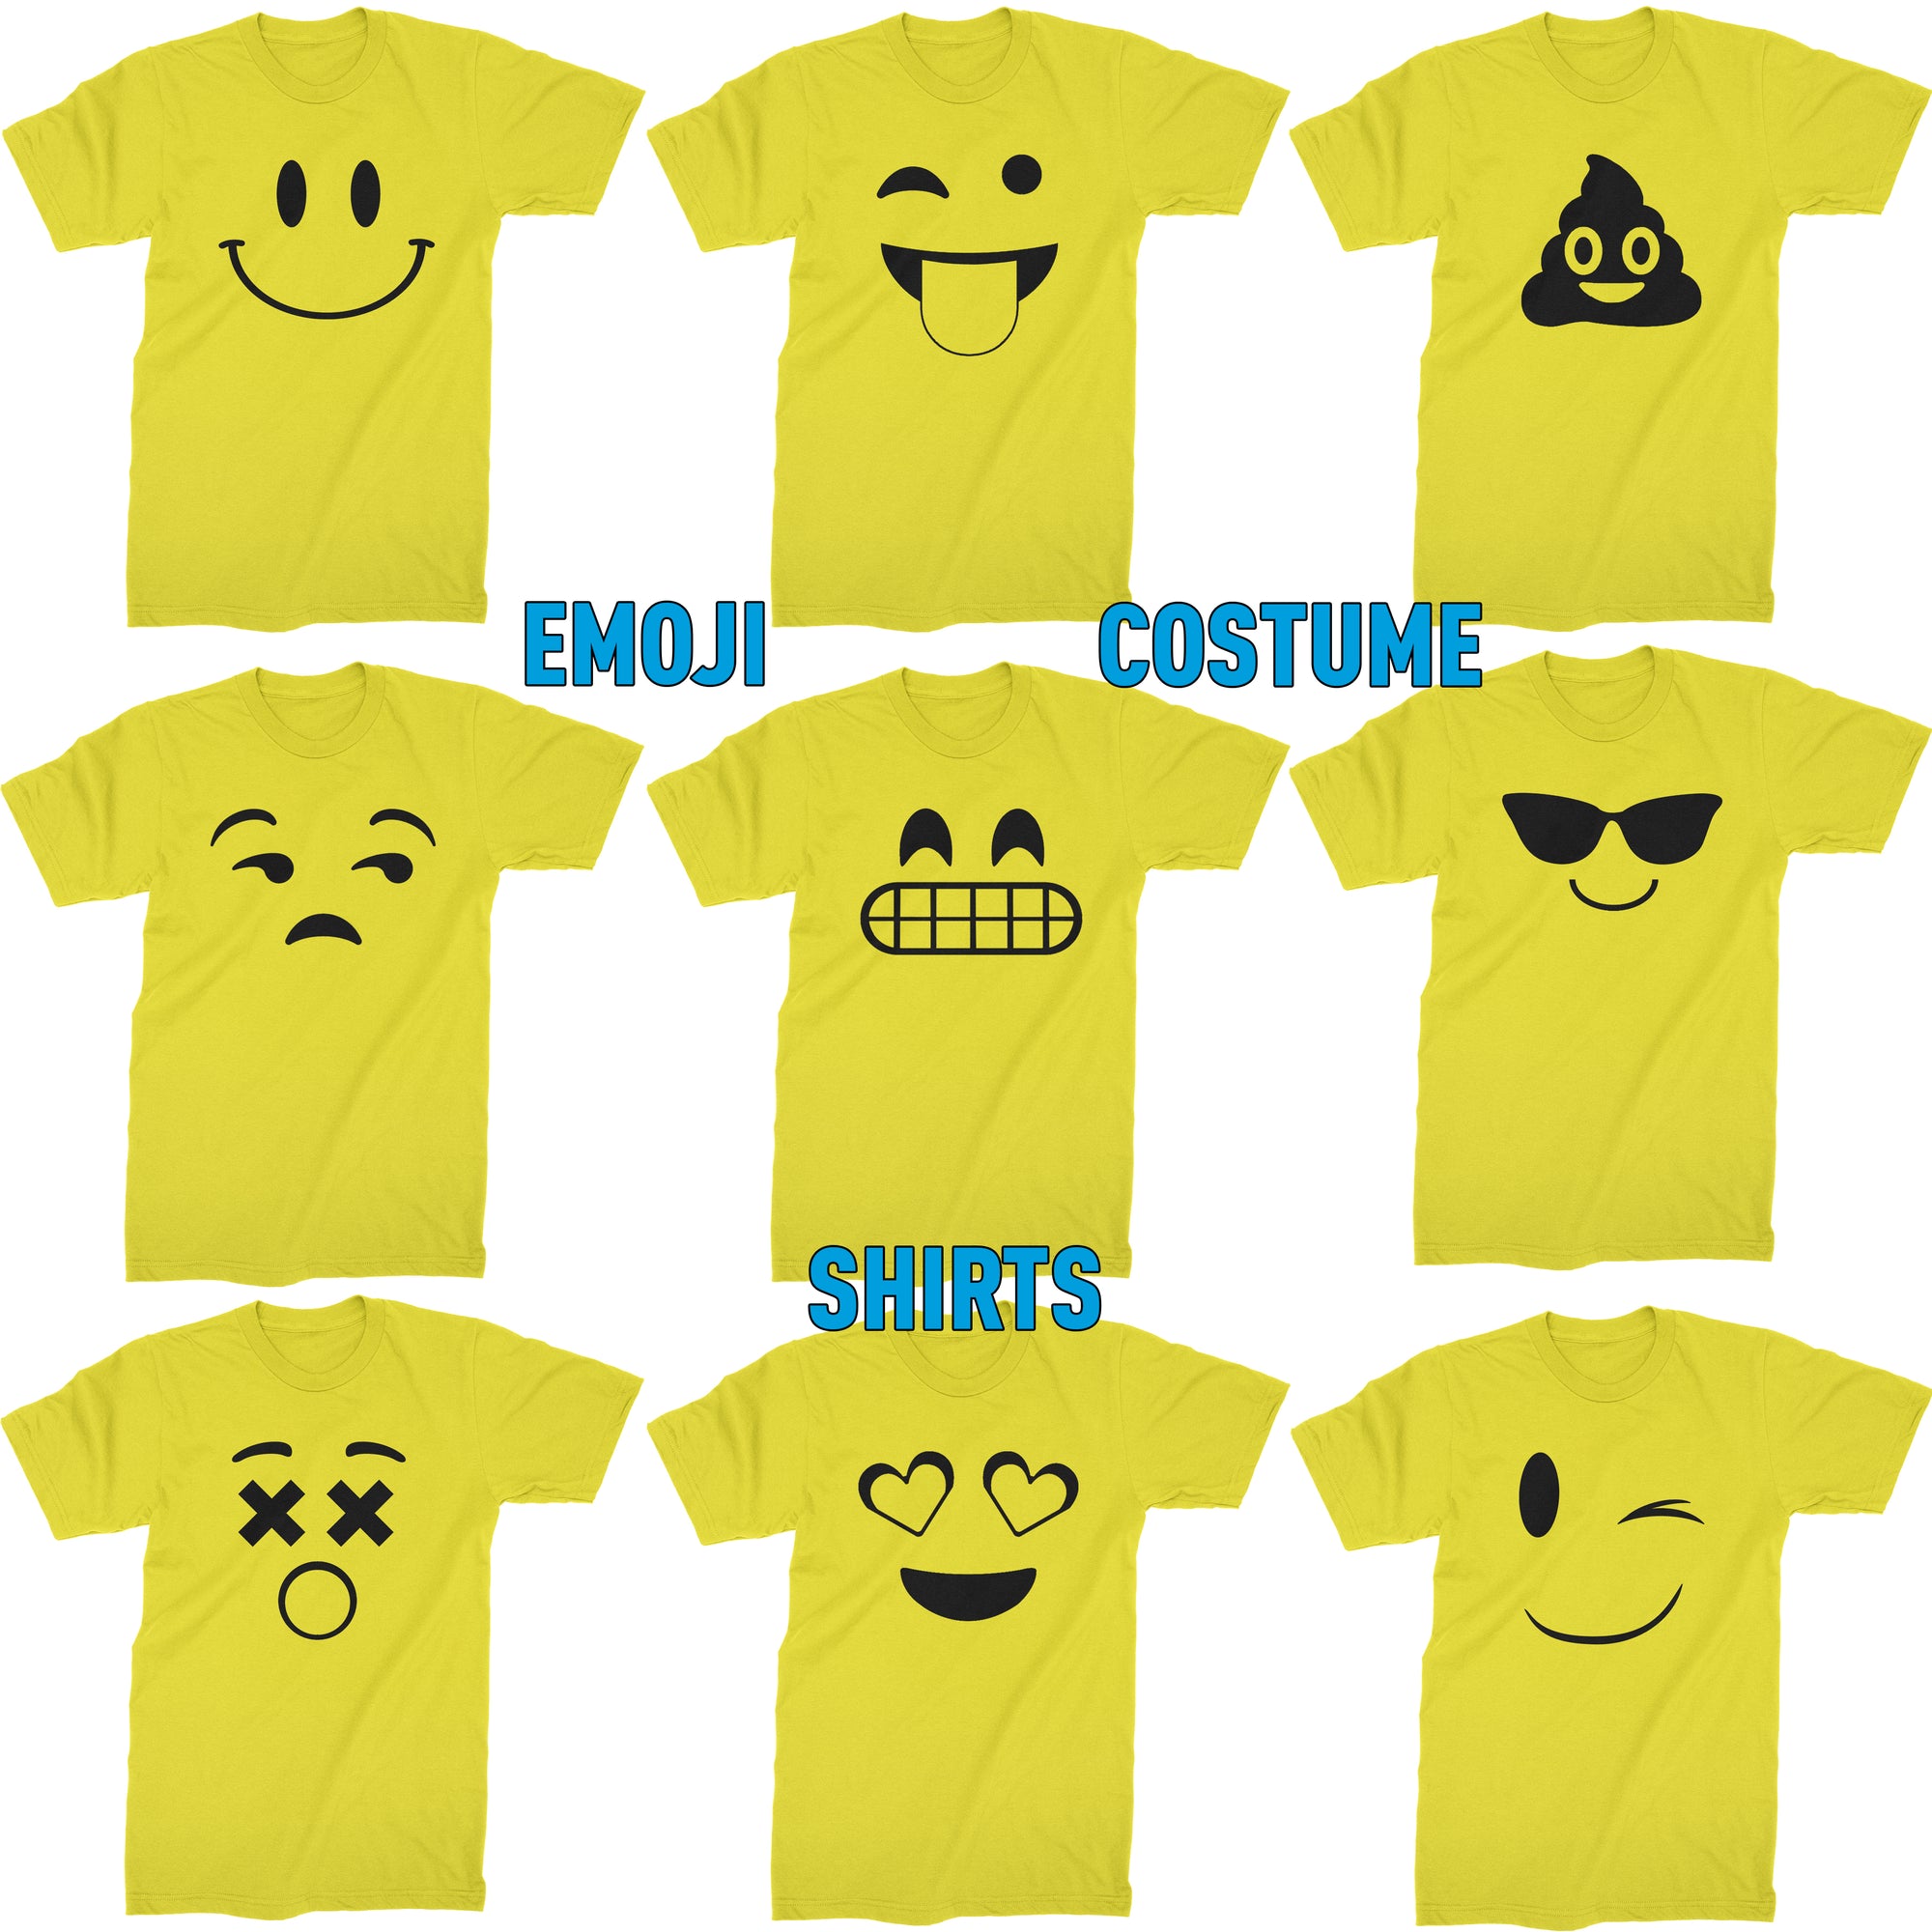 EMOJI SMILEY FACE EMOTICON T-SHIRT COLLECTION HALLOWEEN COSTUME